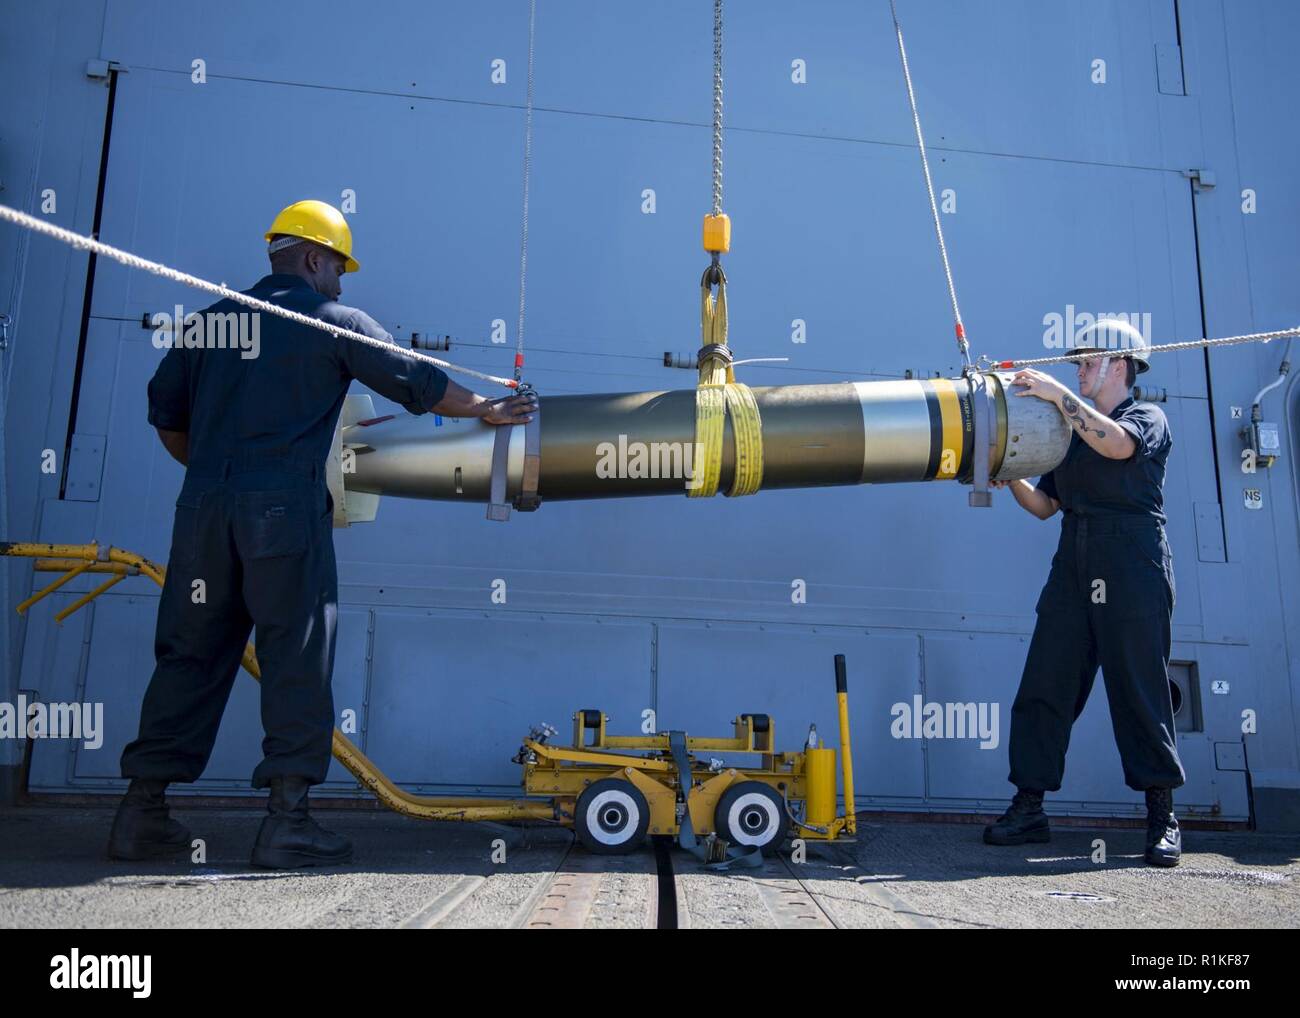 PACIFIC OCEAN (Oct. 14, 2018) Sonar Technician 1st Class Larry Lowe, left, from Los Angeles, and Sonar Technician Seaman Kimber Christie guide a MK46 torpedo as it is relocated from the surface-vessel torpedo tubes to the torpedo magazine aboard the Arleigh-Burke class guided-missile destroyer USS Michael Murphy (DDG 112). Michael Murphy is underway conducting routine operations in the 3rd Fleet area of operations. Stock Photo